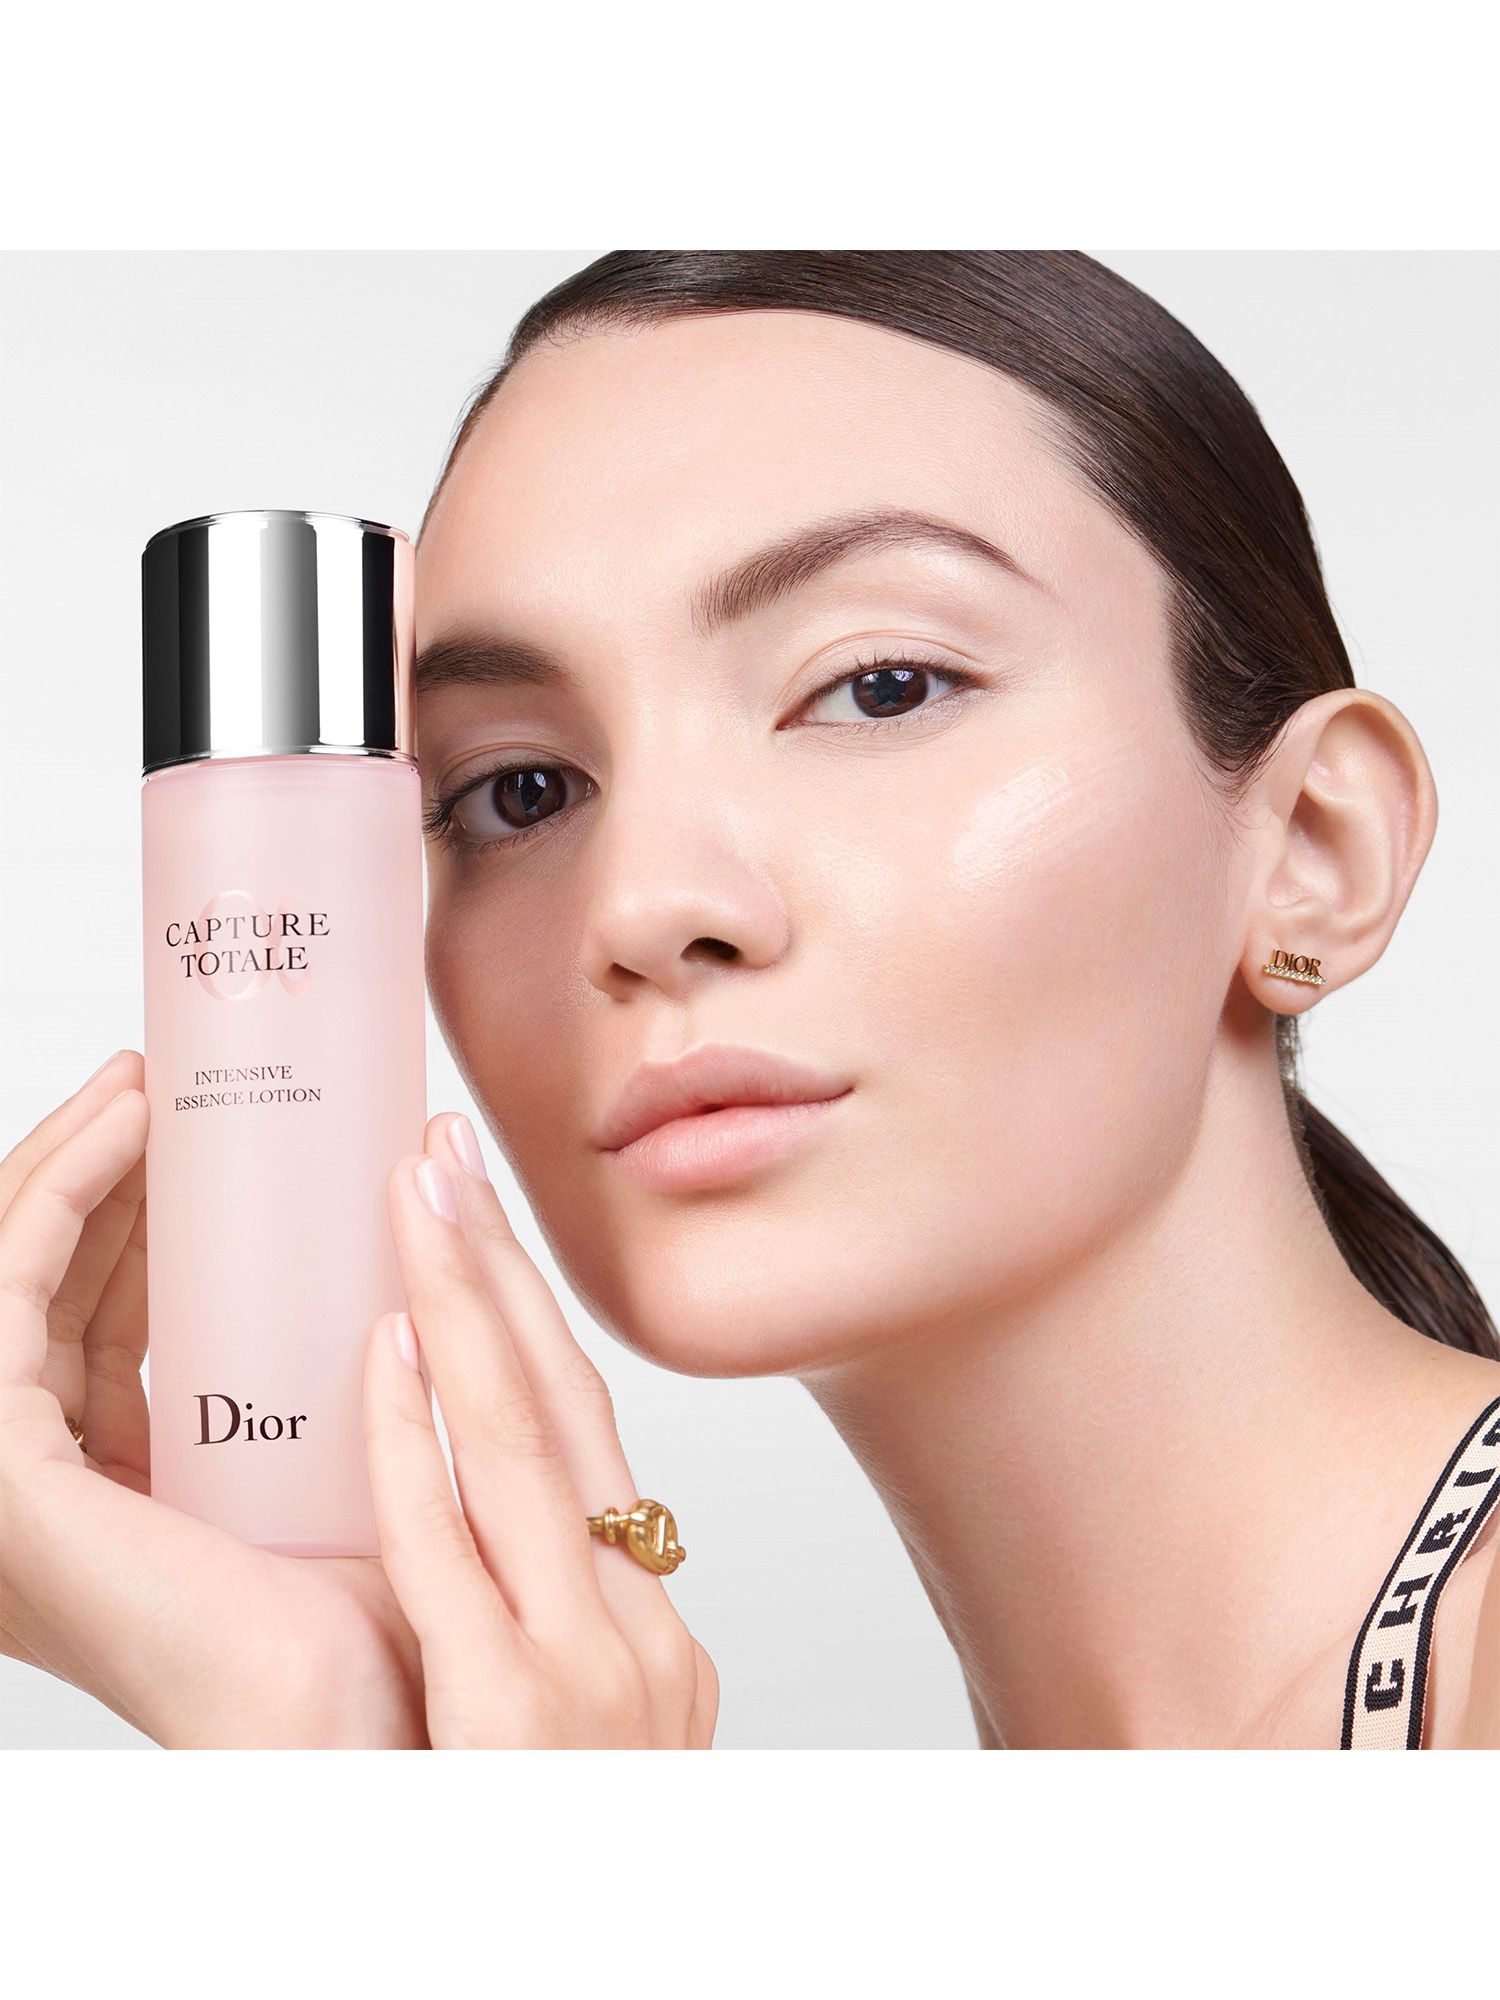 DIOR Capture Totale Intensive Essence Lotion, 50ml 4